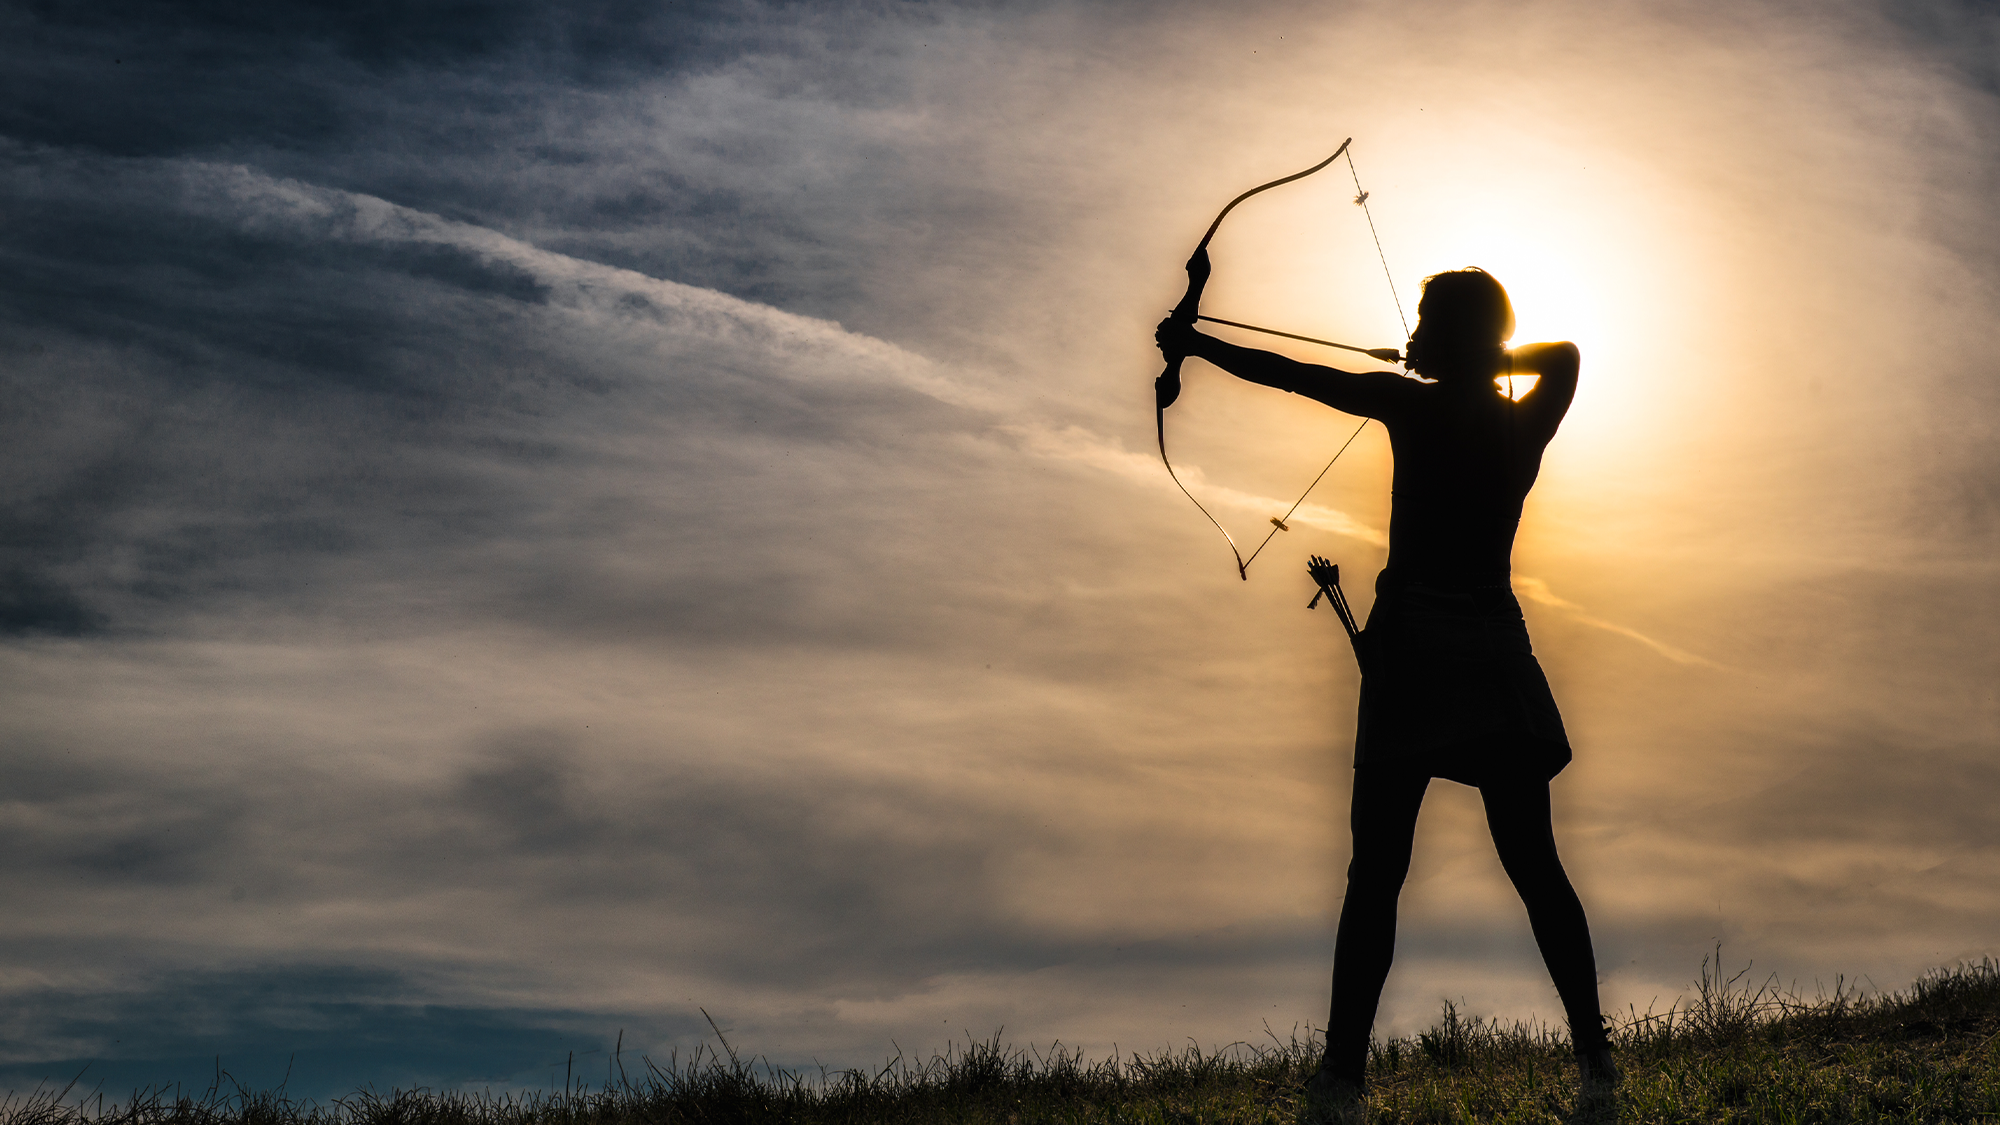 Women hunt game in most foraging cultures Popular Science